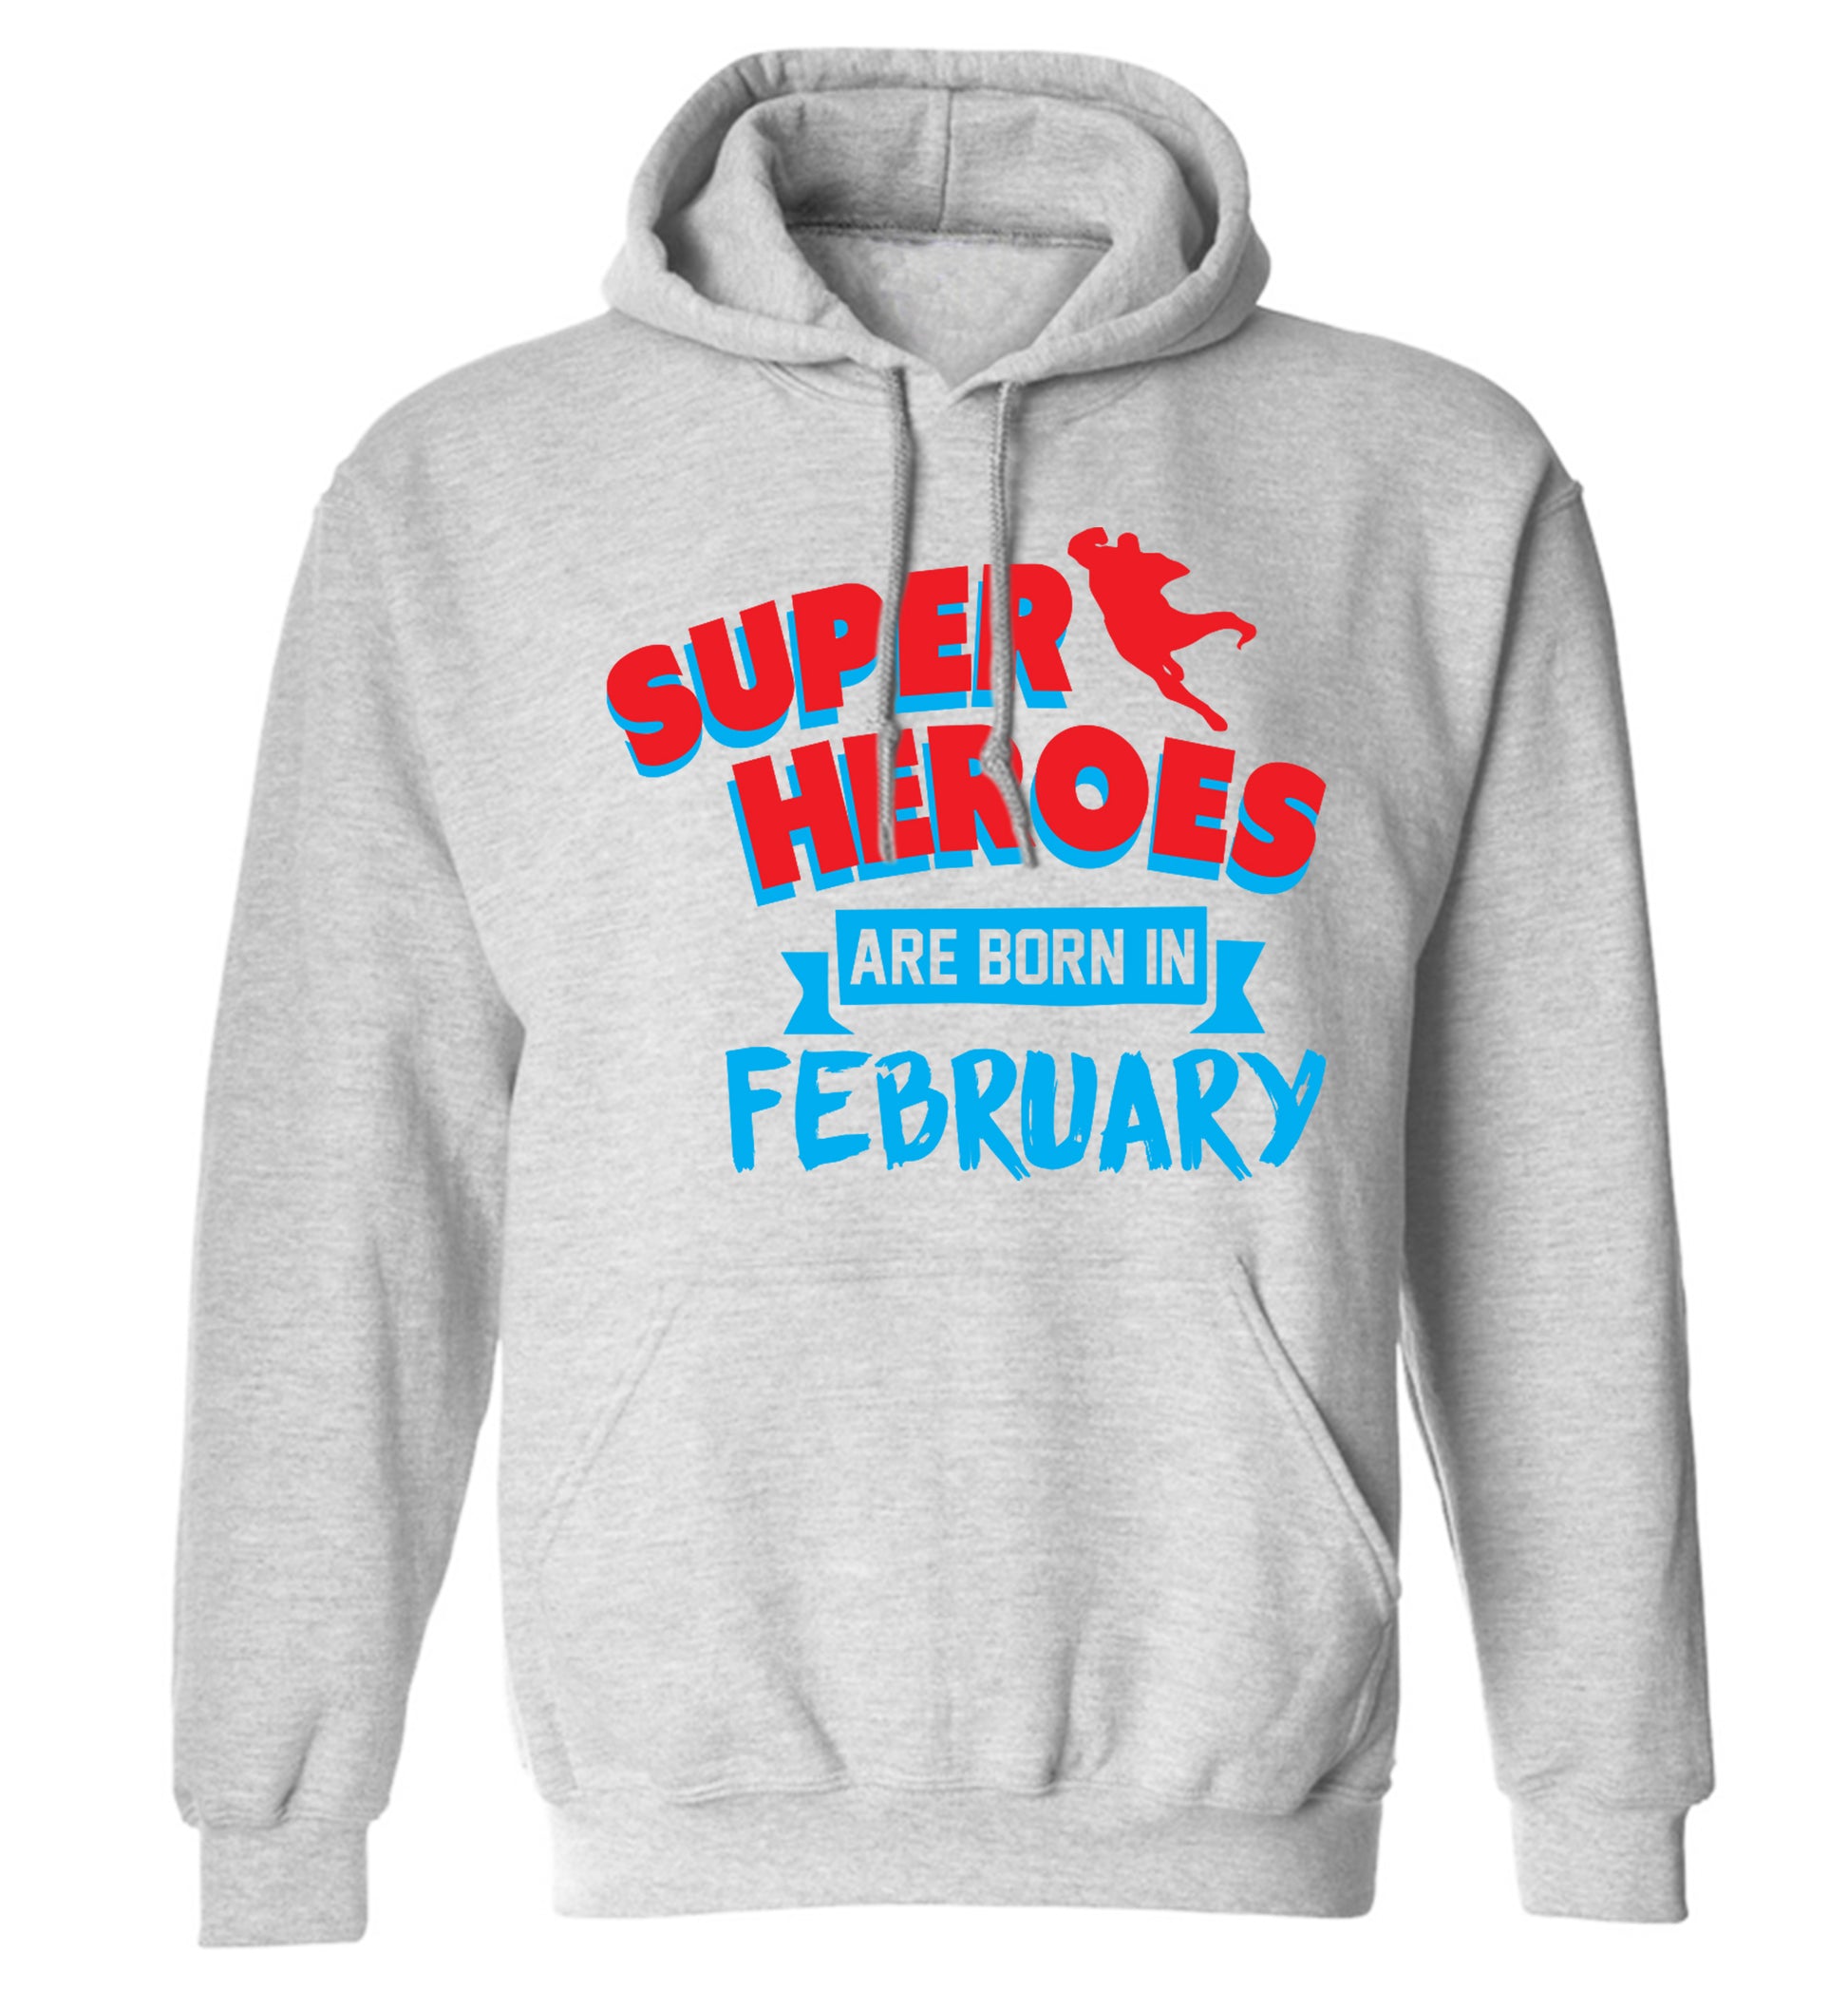 superheroes are born in February adults unisex grey hoodie 2XL